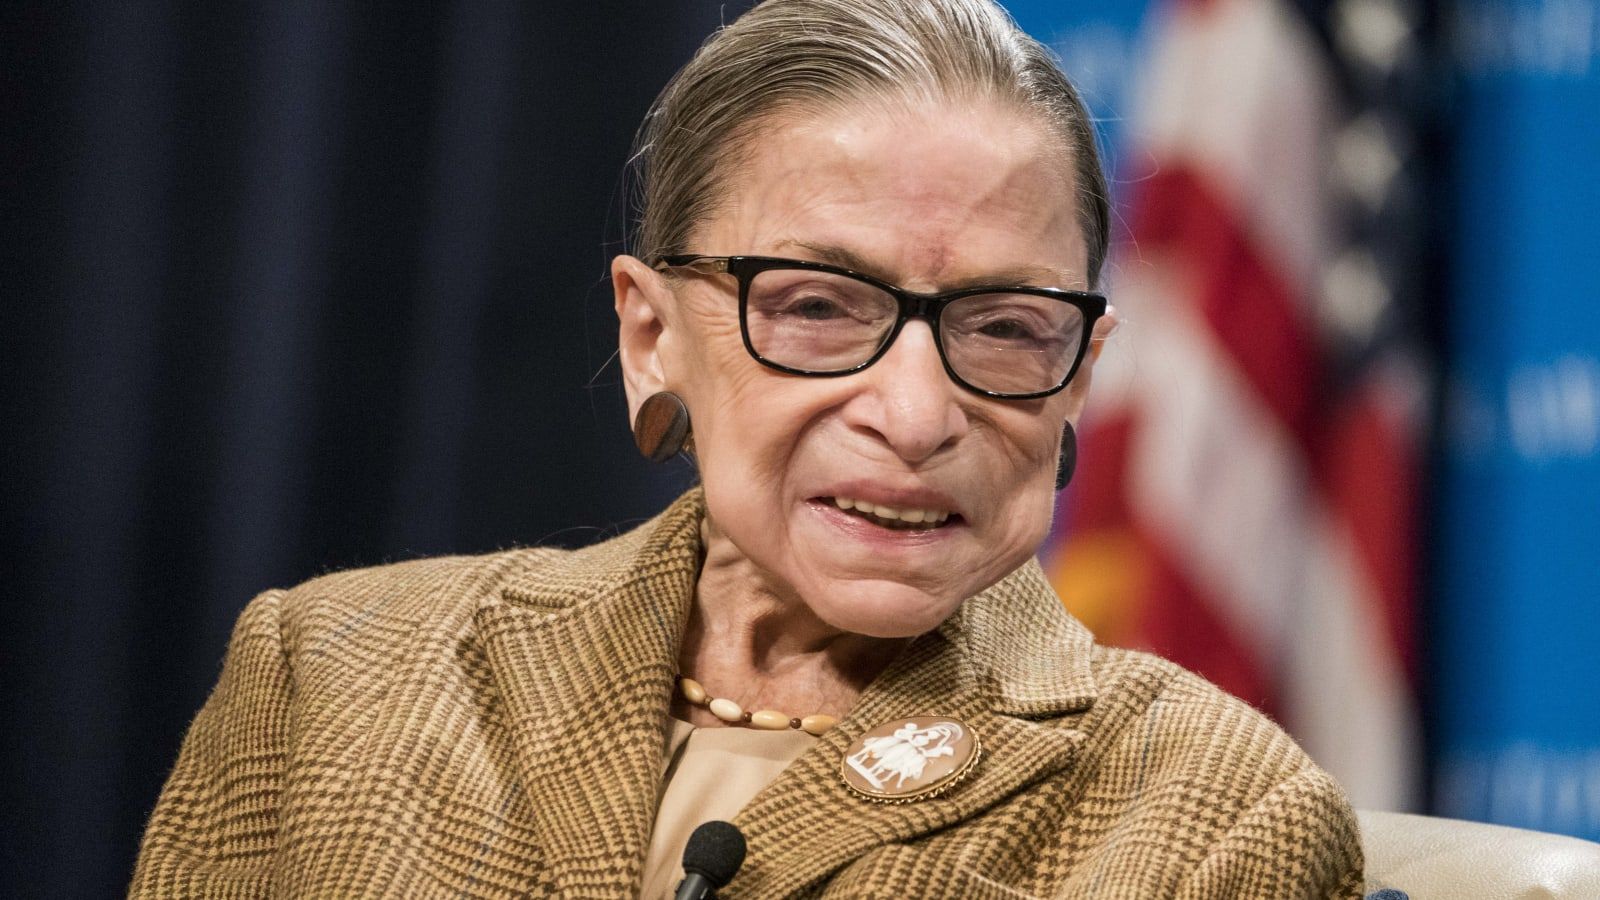 Thank you, RBG': Leaders react with sadness, shock to Ruth Bader Ginsburg's death